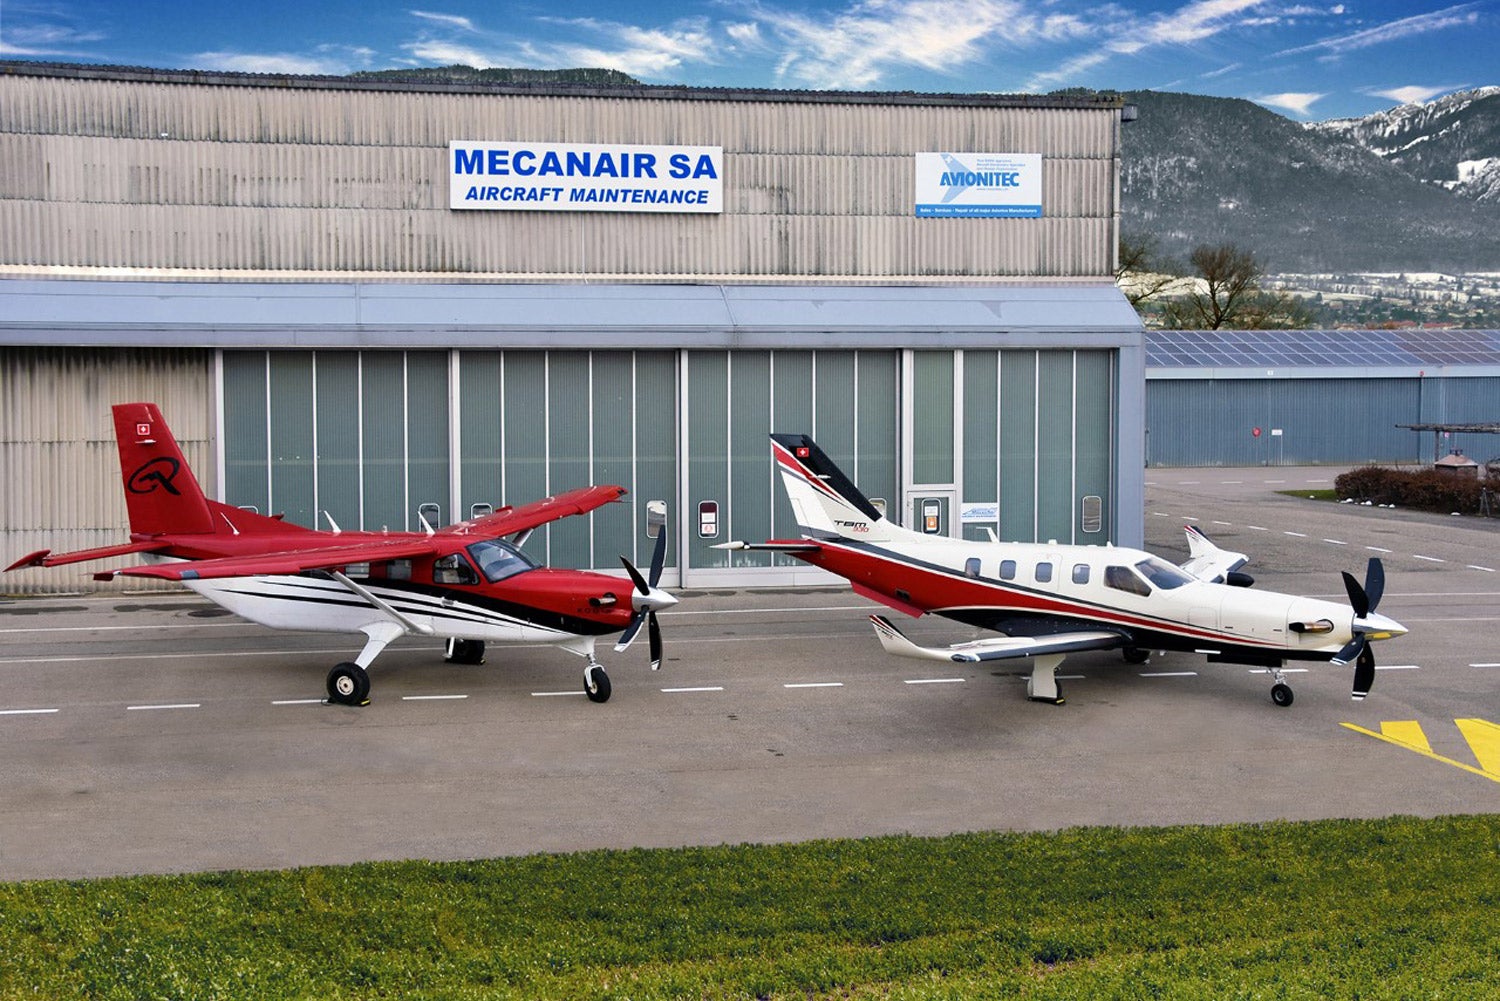 Daher’s TBM and Kodiak Deliveries Carry It Through 2020